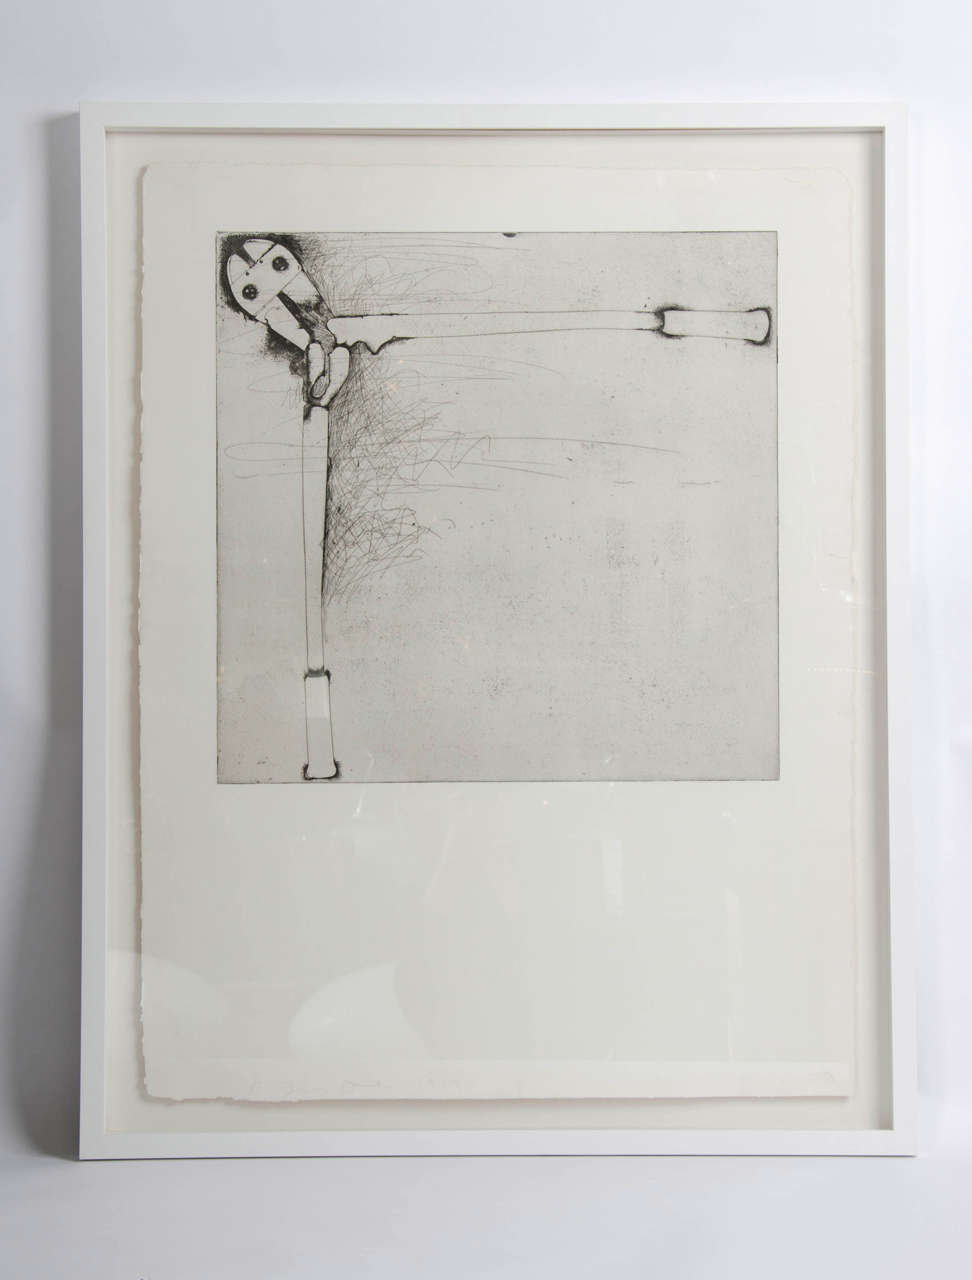 Bolt Cutters, Jim Dine, American b.1935-  drypoint etching and aquatint, signed and dated 1973, numbered 1/75, 60x61cm (some repairs to the margins)